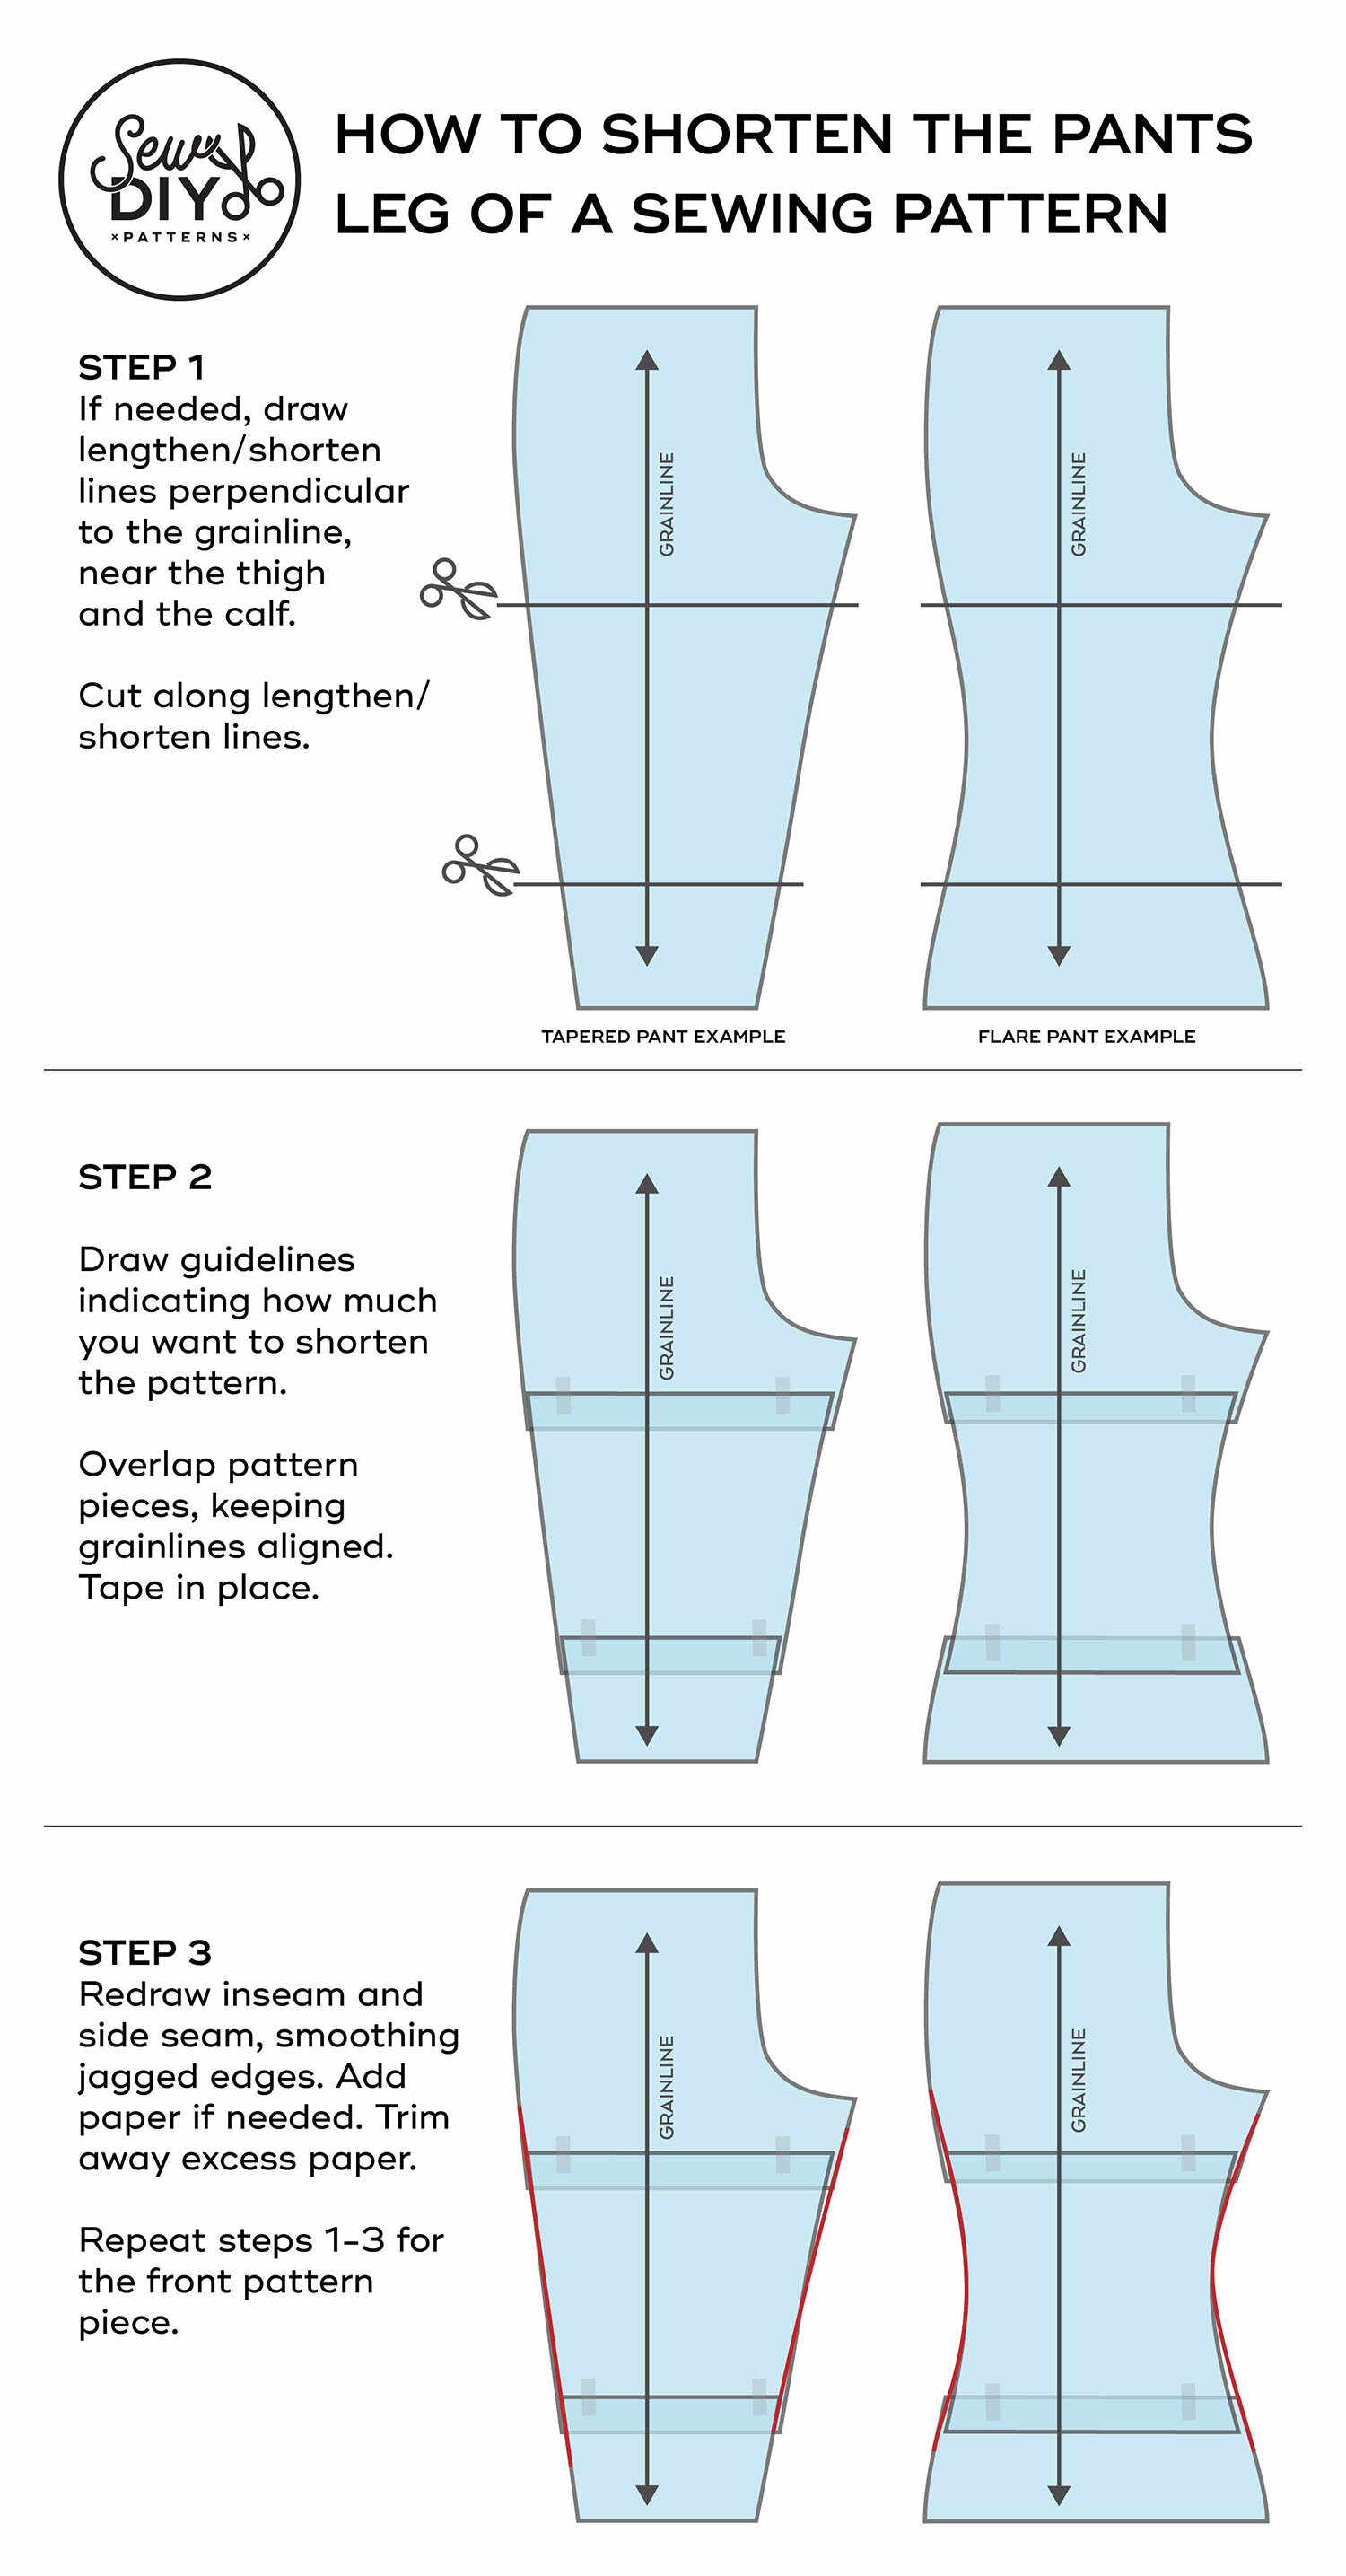 How to shorten or lengthen the legs of a pants pattern - Video tutorial ...